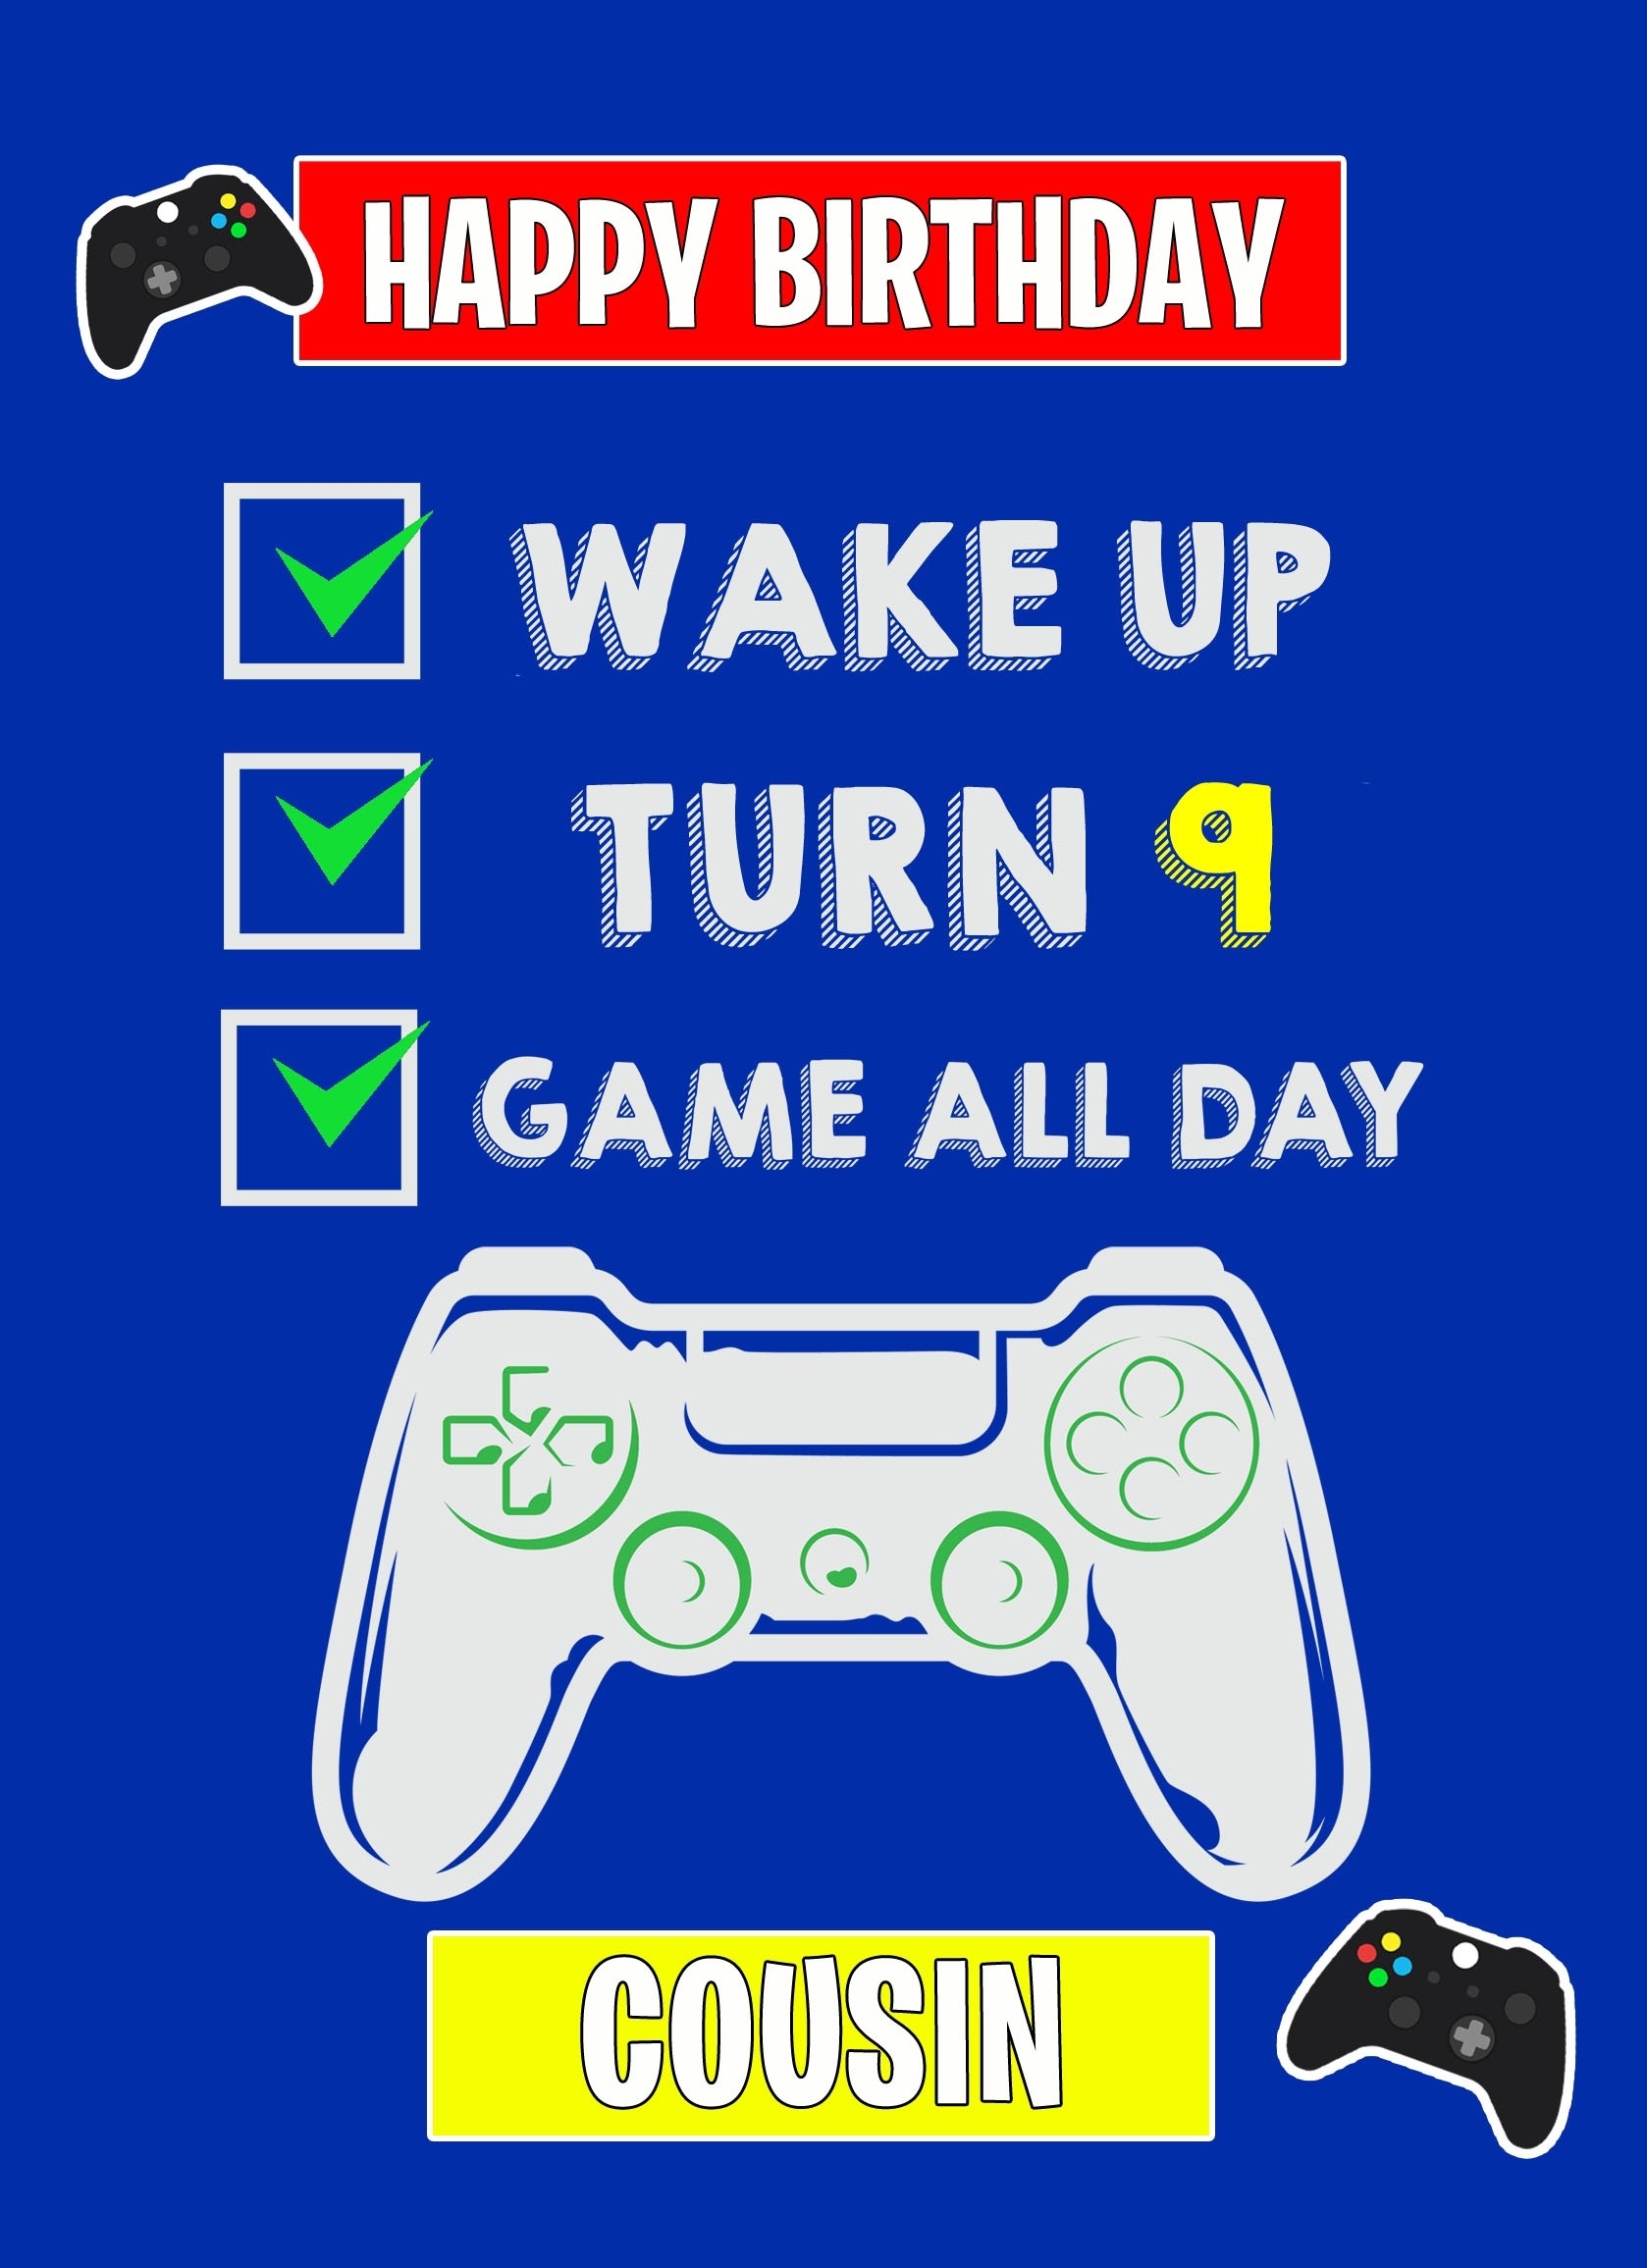 9th Level Gamer Birthday Card For Cousin